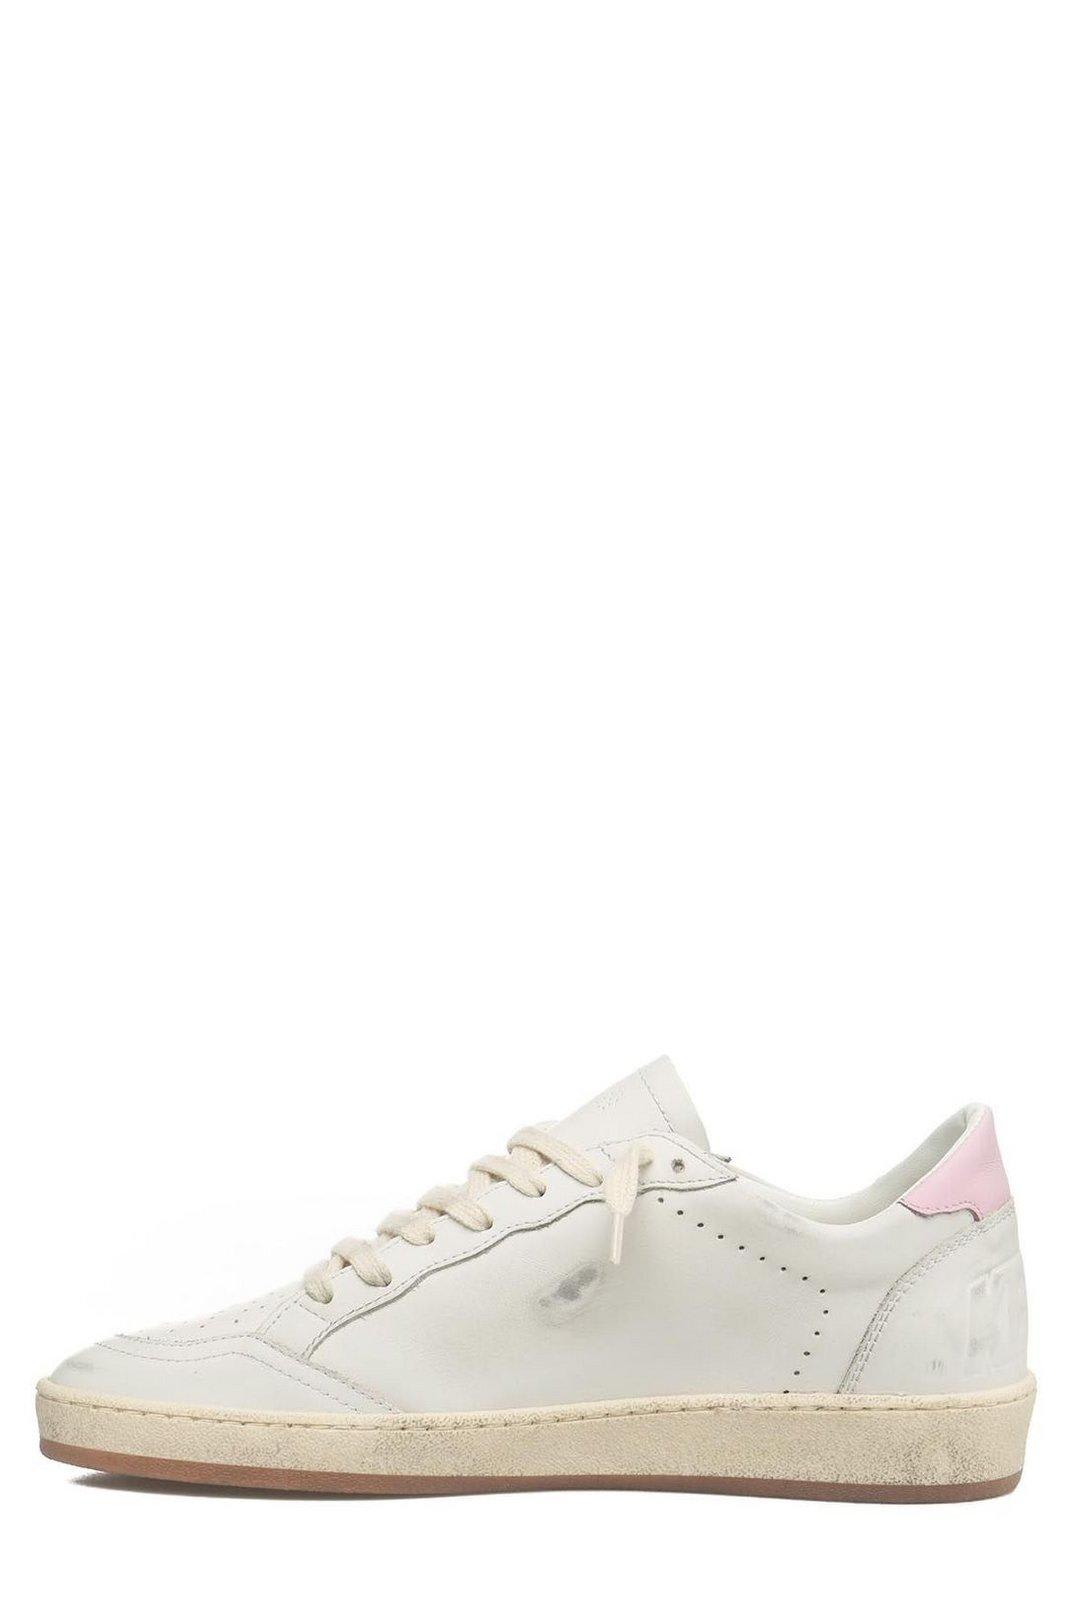 Shop Golden Goose Ball Star Low-top Sneakers In White/platinum/pink